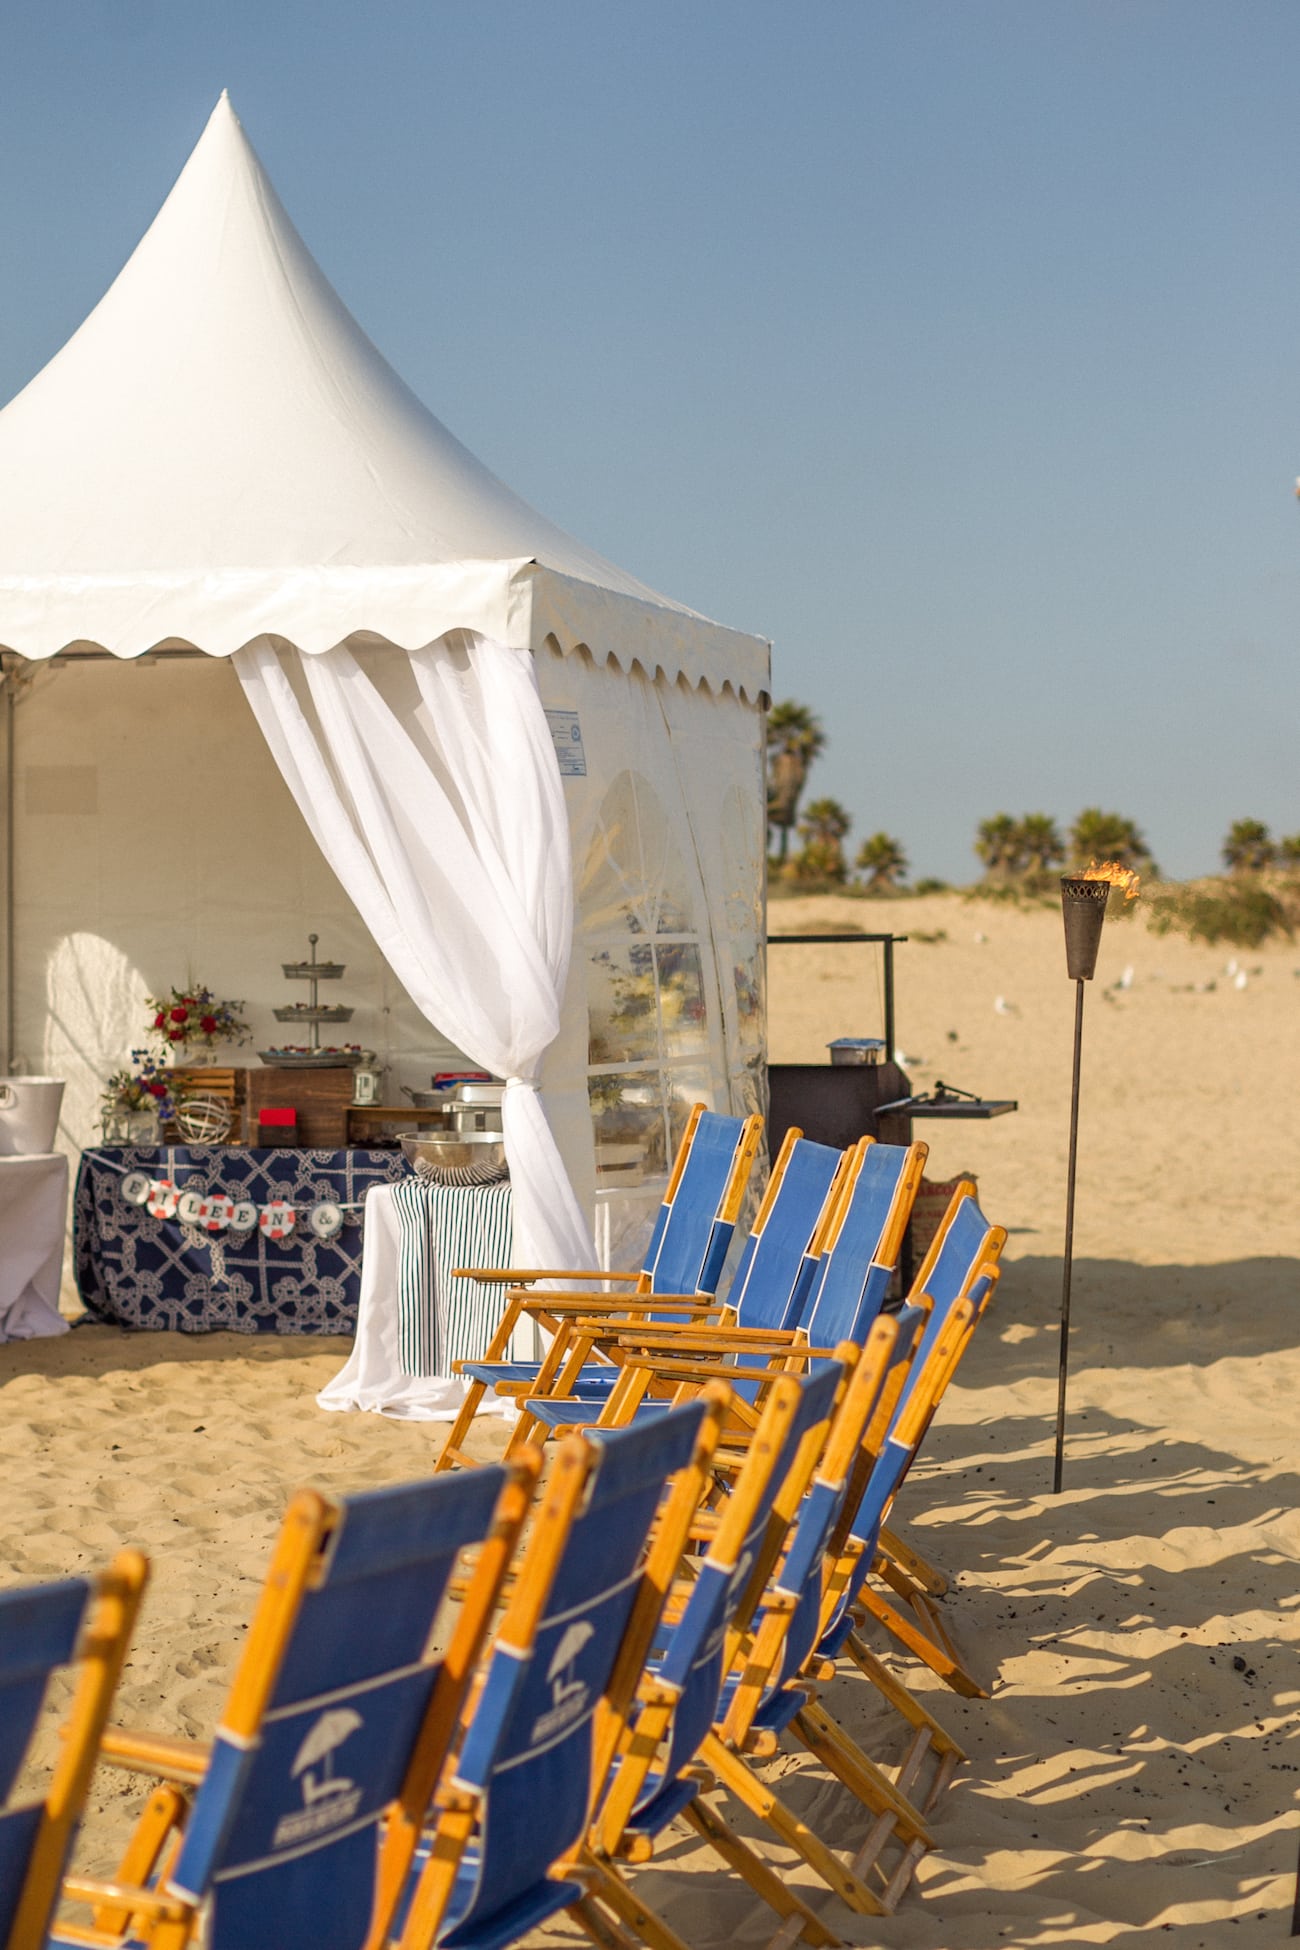 Beach Butlerz offers affordable and fun rentals for your wedding rehearsal party or event at the beach